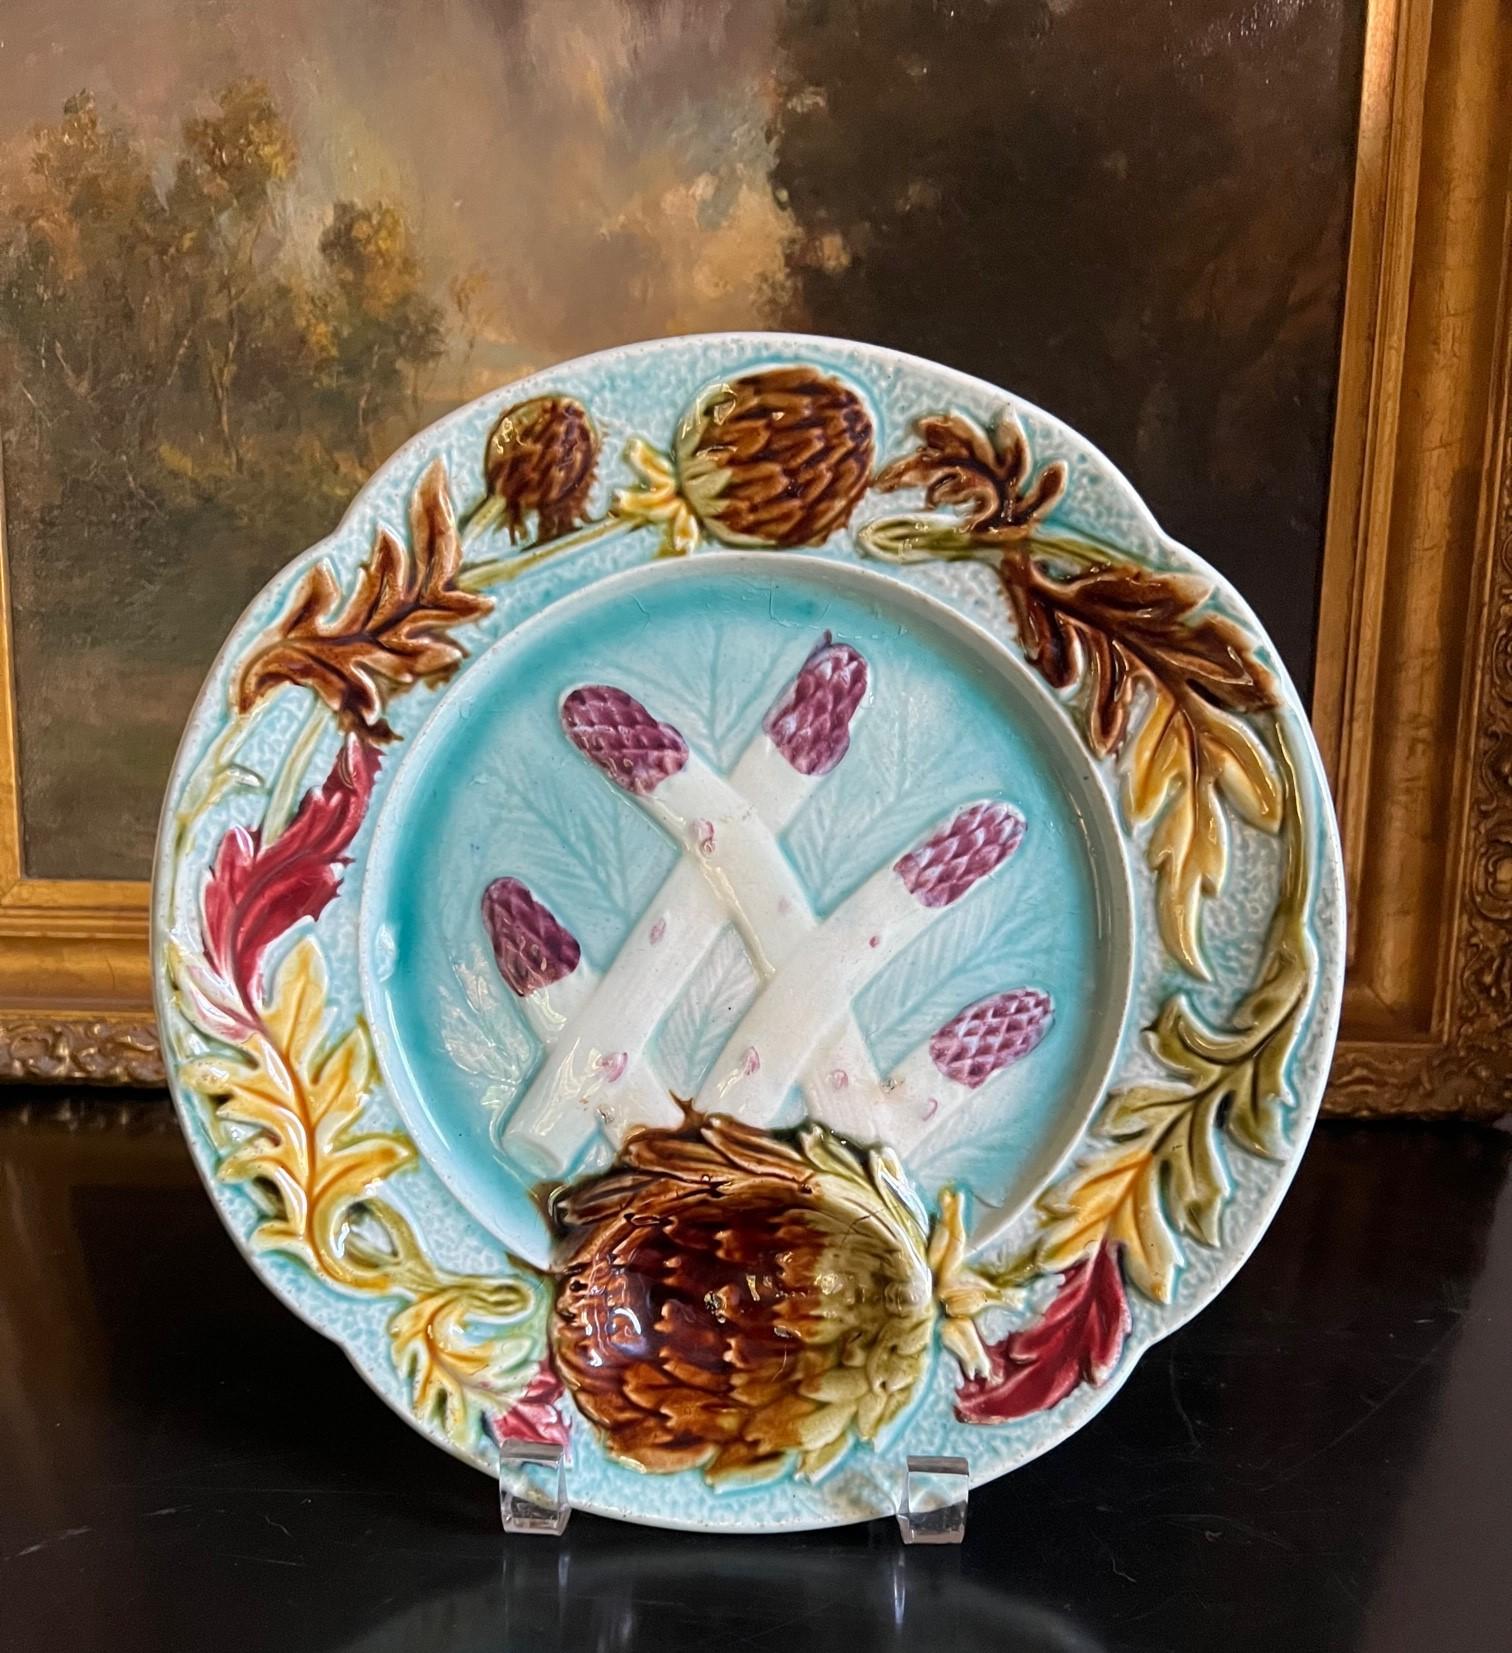 Vibrantly colored French majolica asparagus and artichoke plate made in the Orchies factory in the late 1800's. The plate has a scalloped rim with artichoke flowers and fall colored leaves, the largest flower is a depressed sauce well. The center of